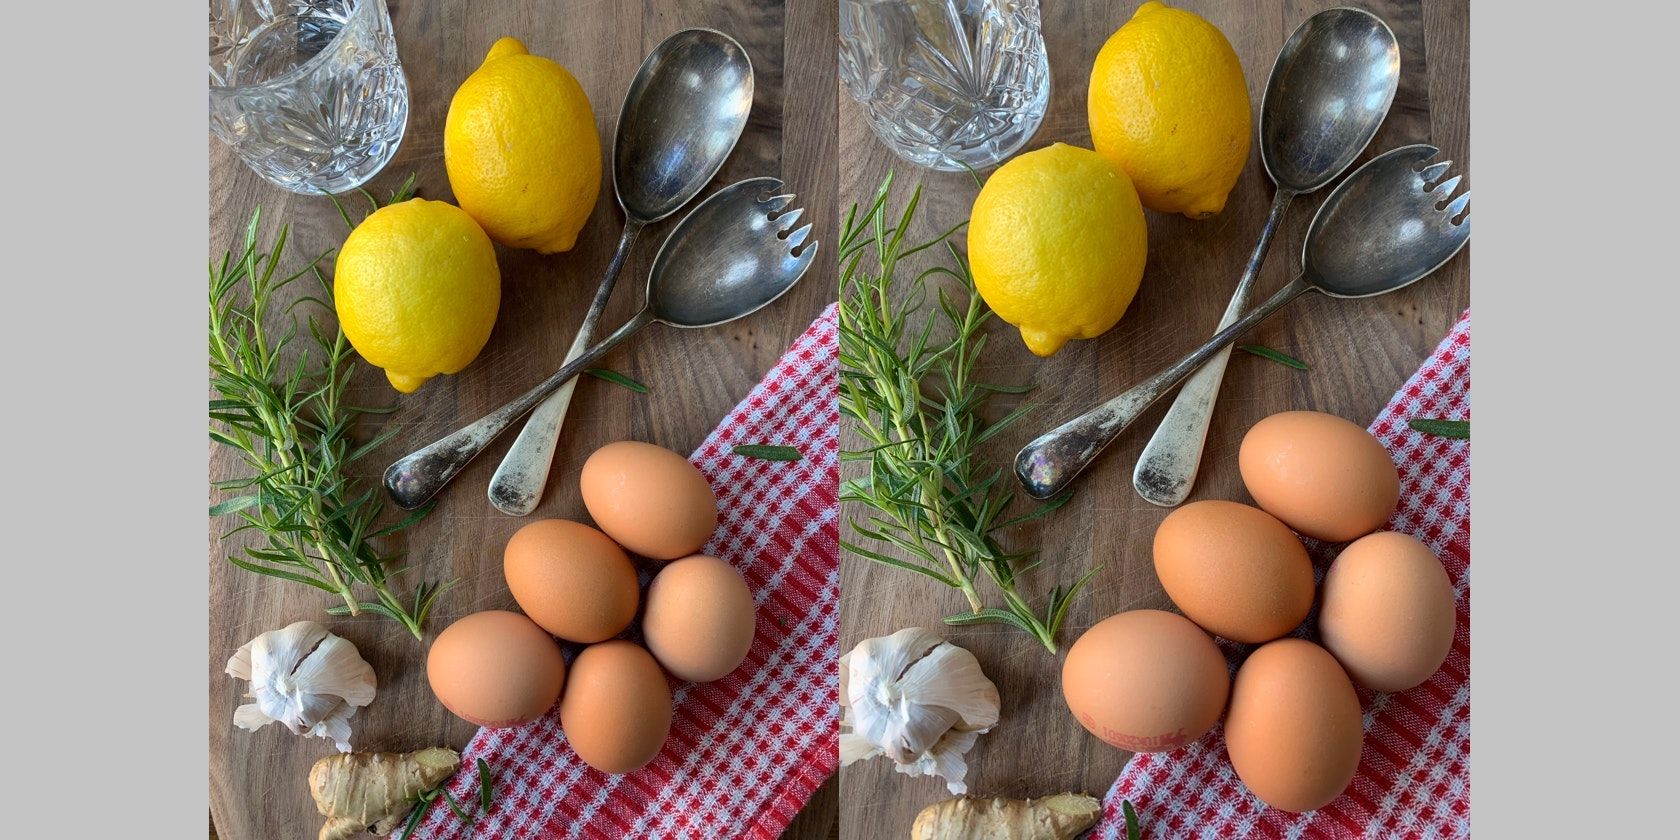 Two overhead shots side by side showing the same ingredients. One image was taken straight while the other was captured at a slight angle